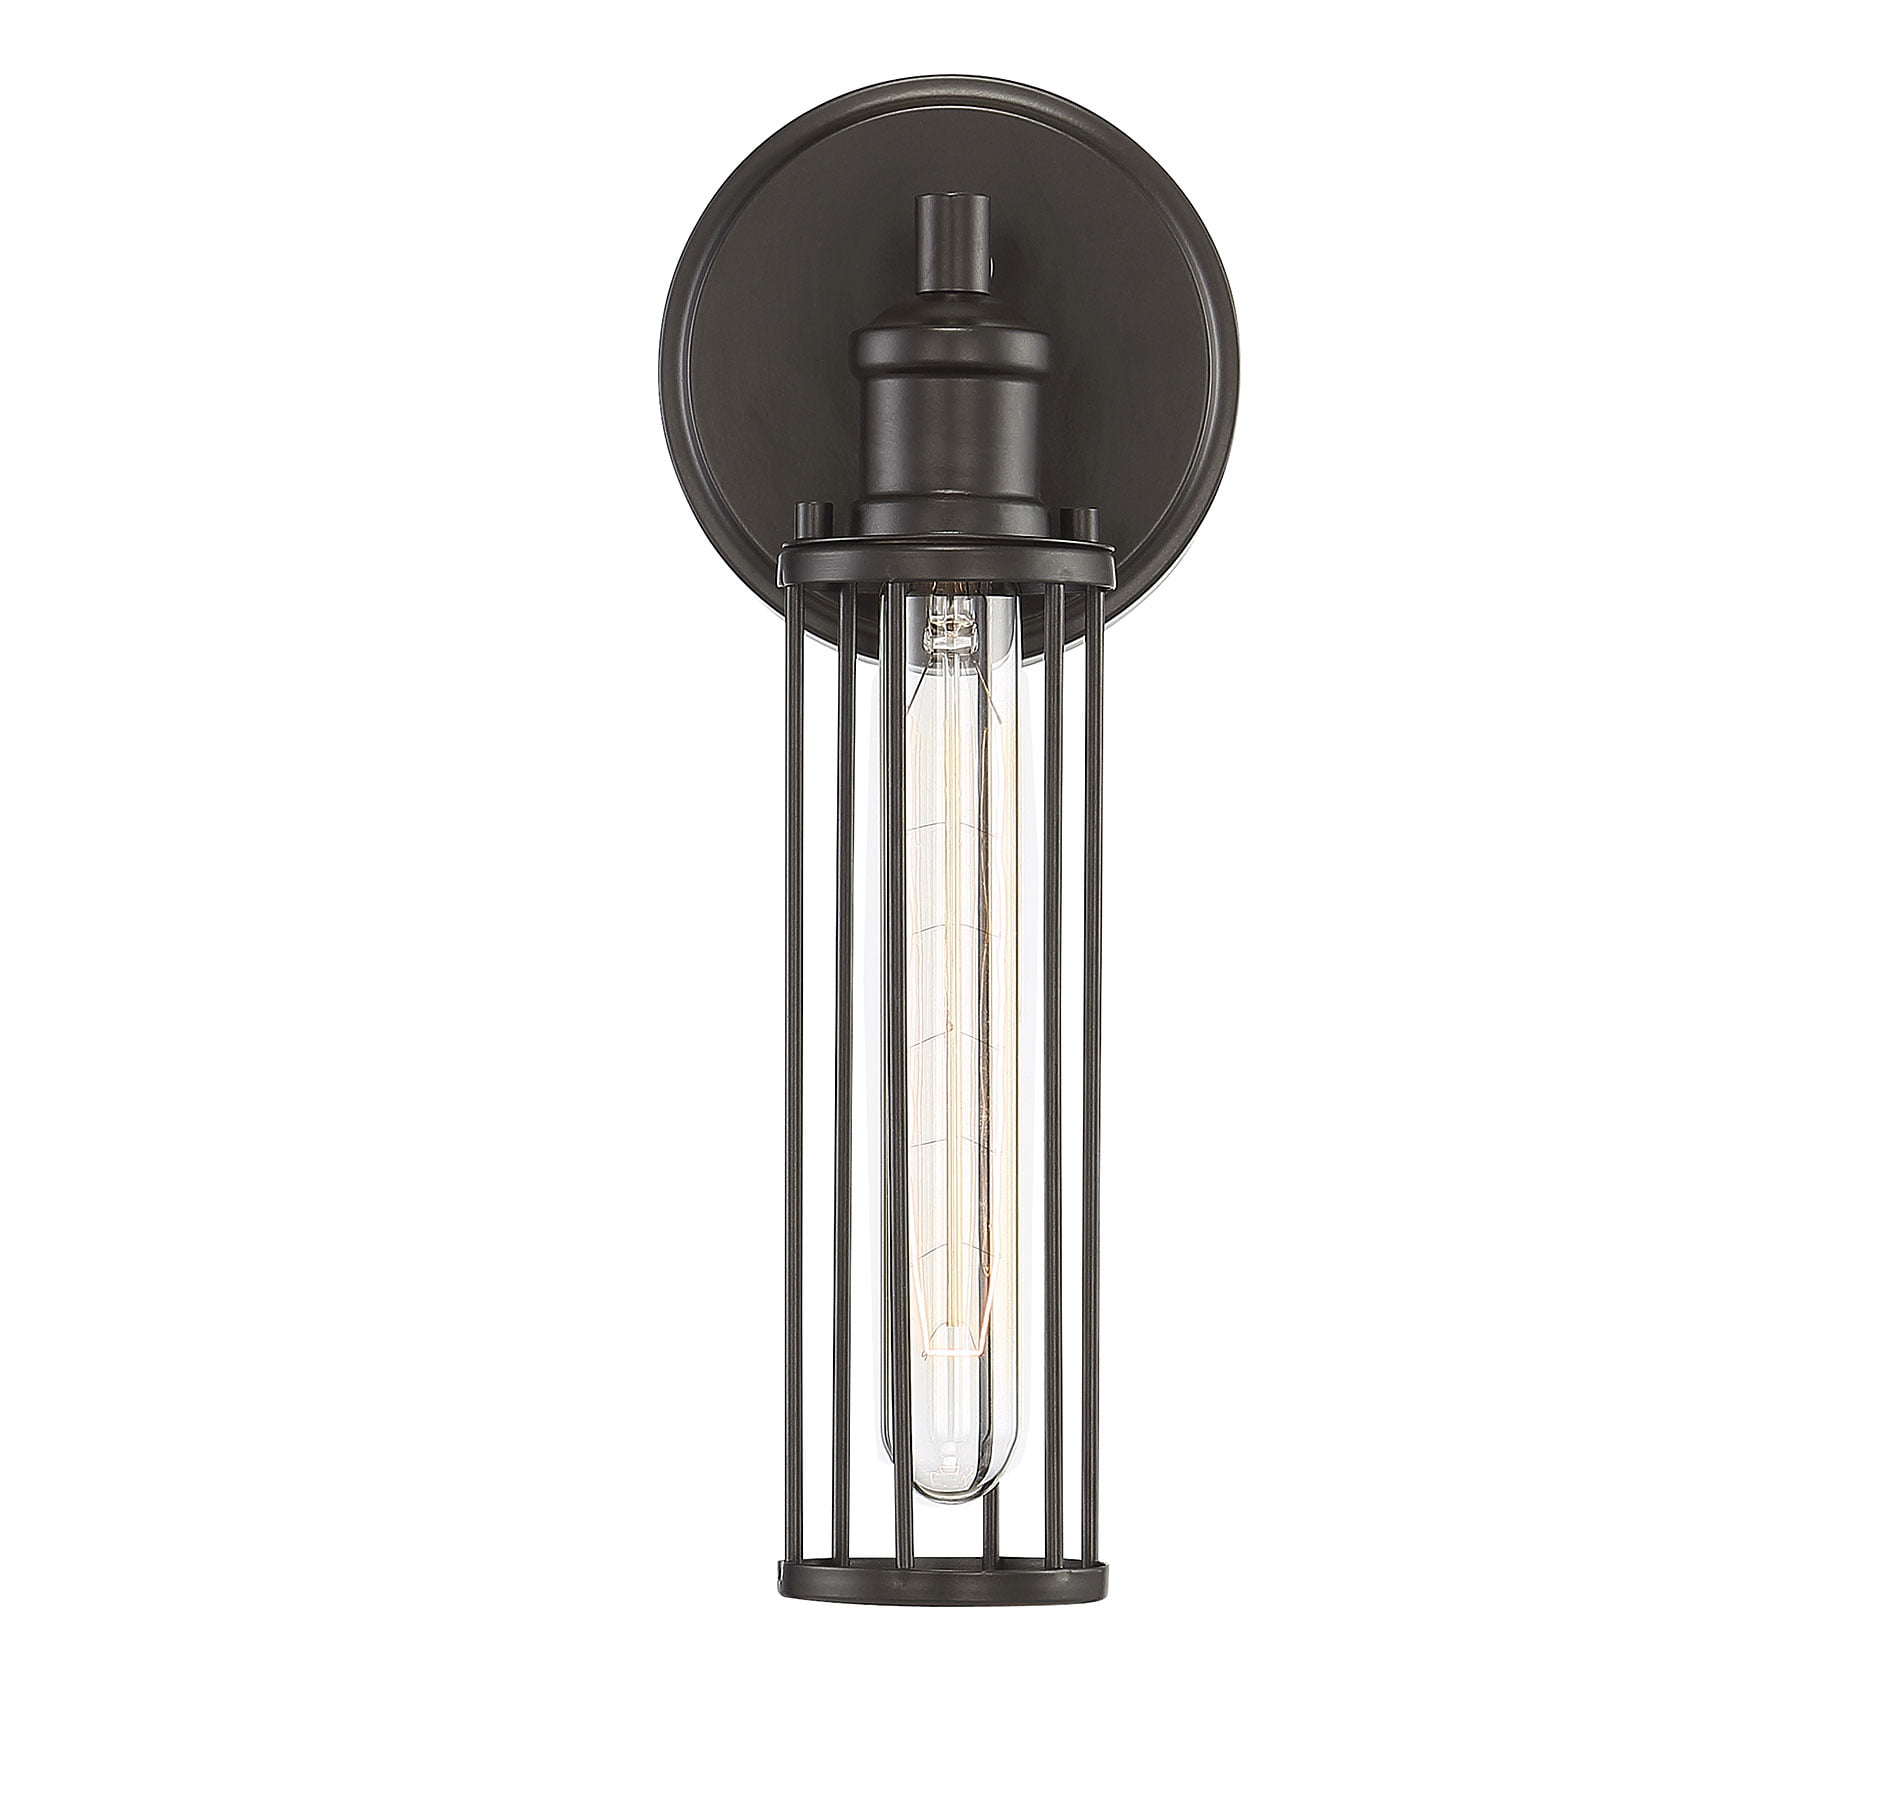 Contemporary Transitional Bulb Included Vanity Lighting JONATHAN Y JYL7429A August 7.75 1 Metal Shade Wall Sconce for Bedroom Livingroom Bathroom Brass Gold